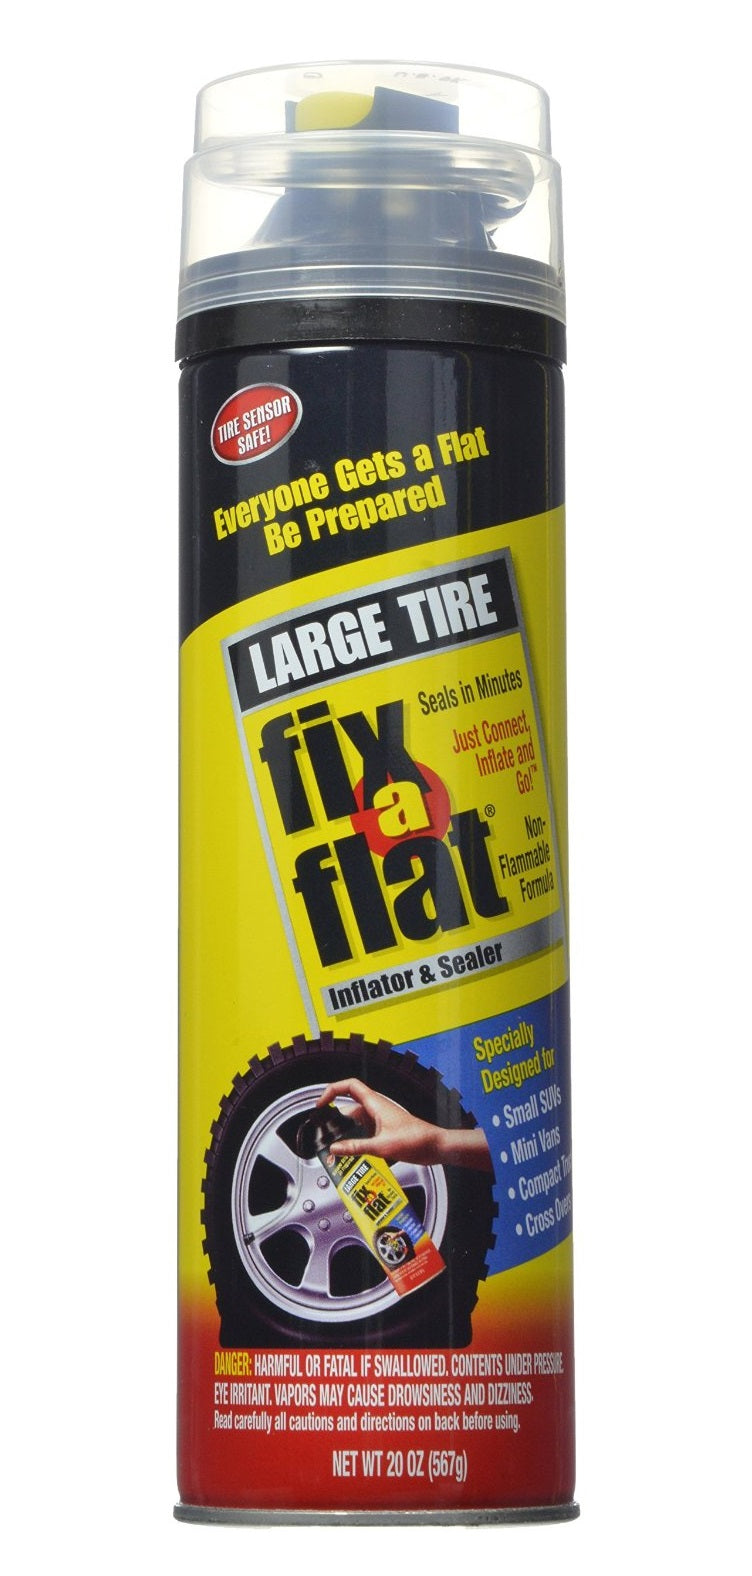 Pennzoil S430 Fix A Flat With Hose Tire Inflator And Sealer, 20 Oz